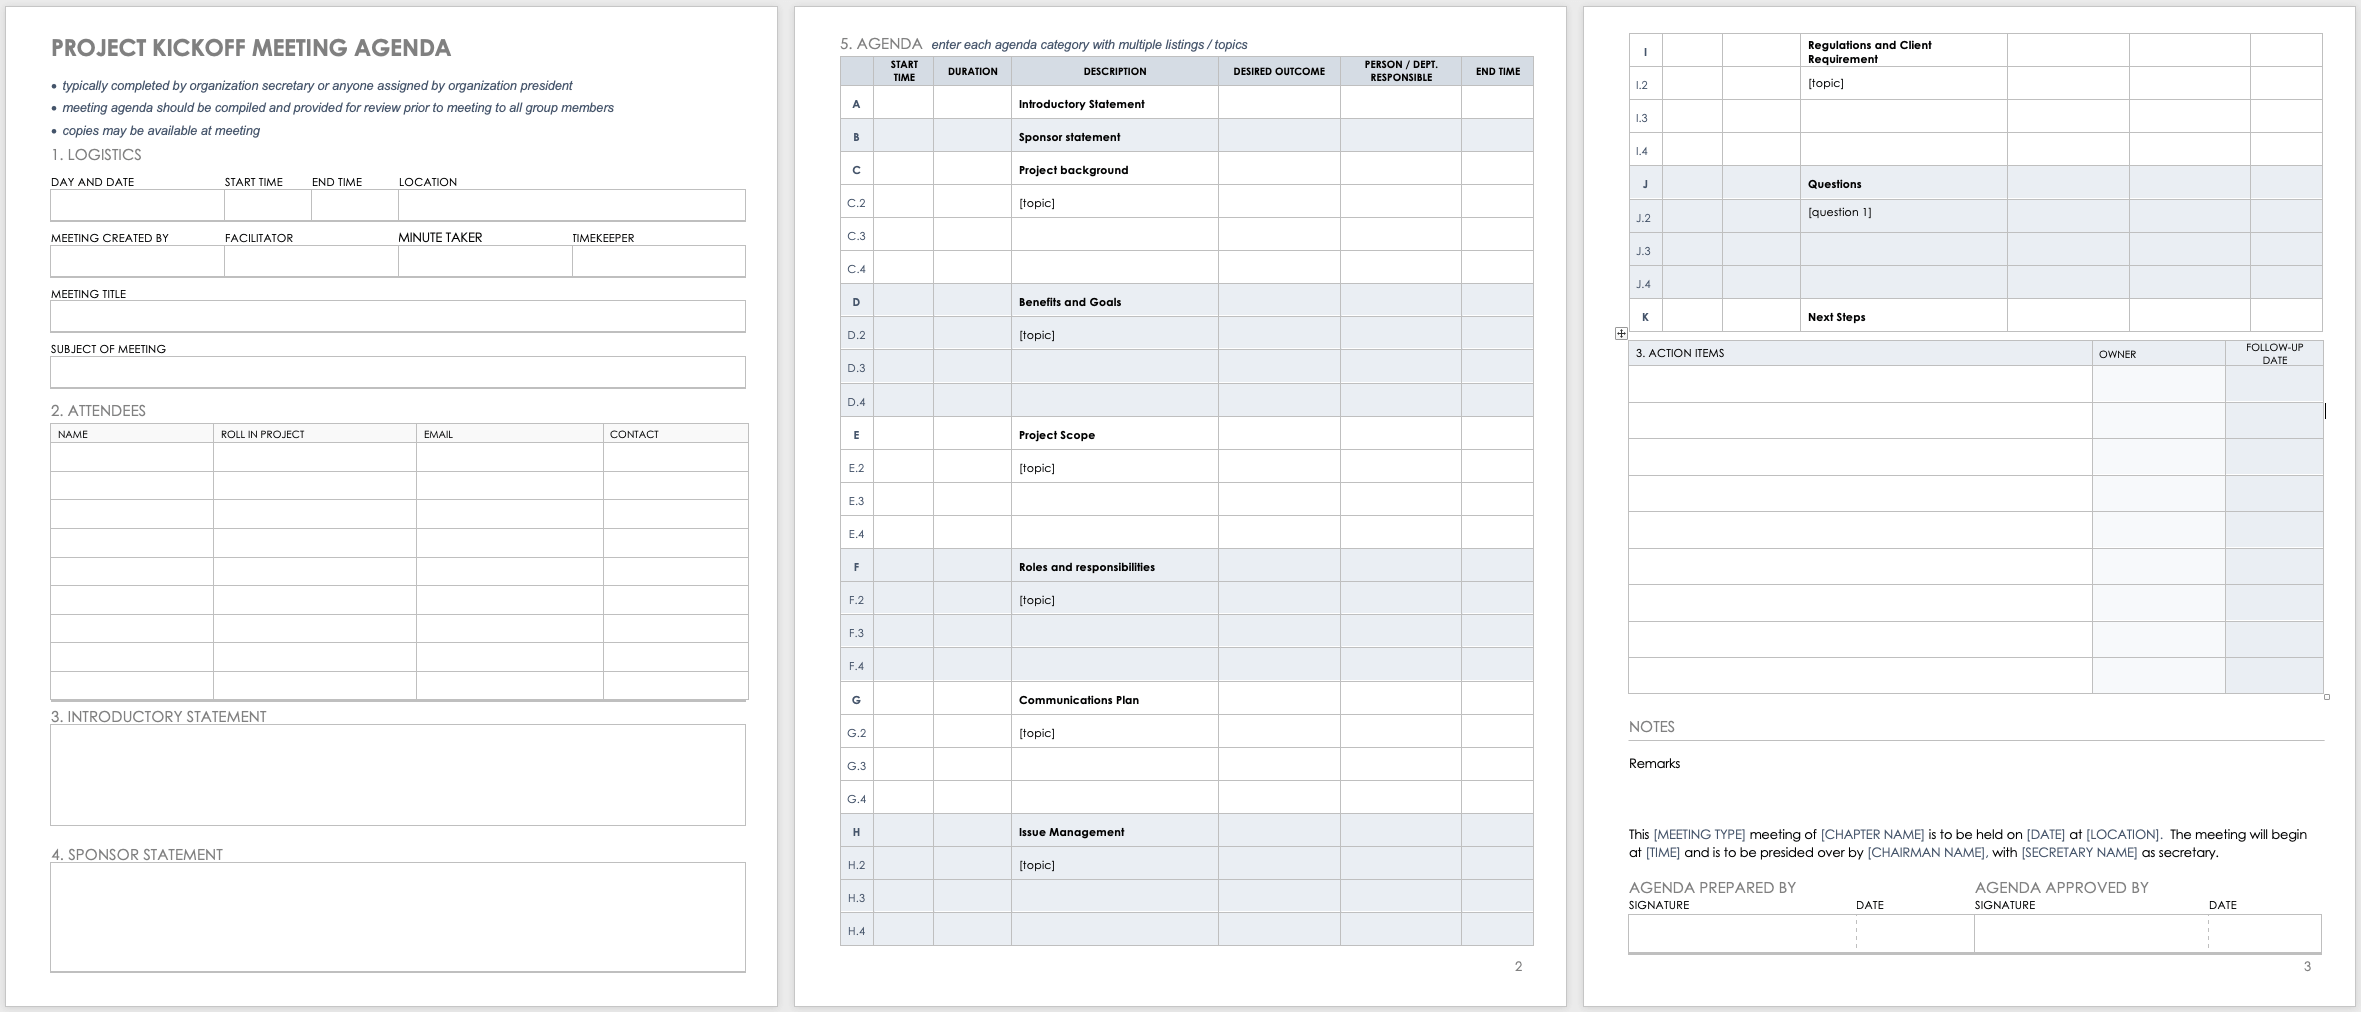 Project Kickoff Meeting Agenda Template